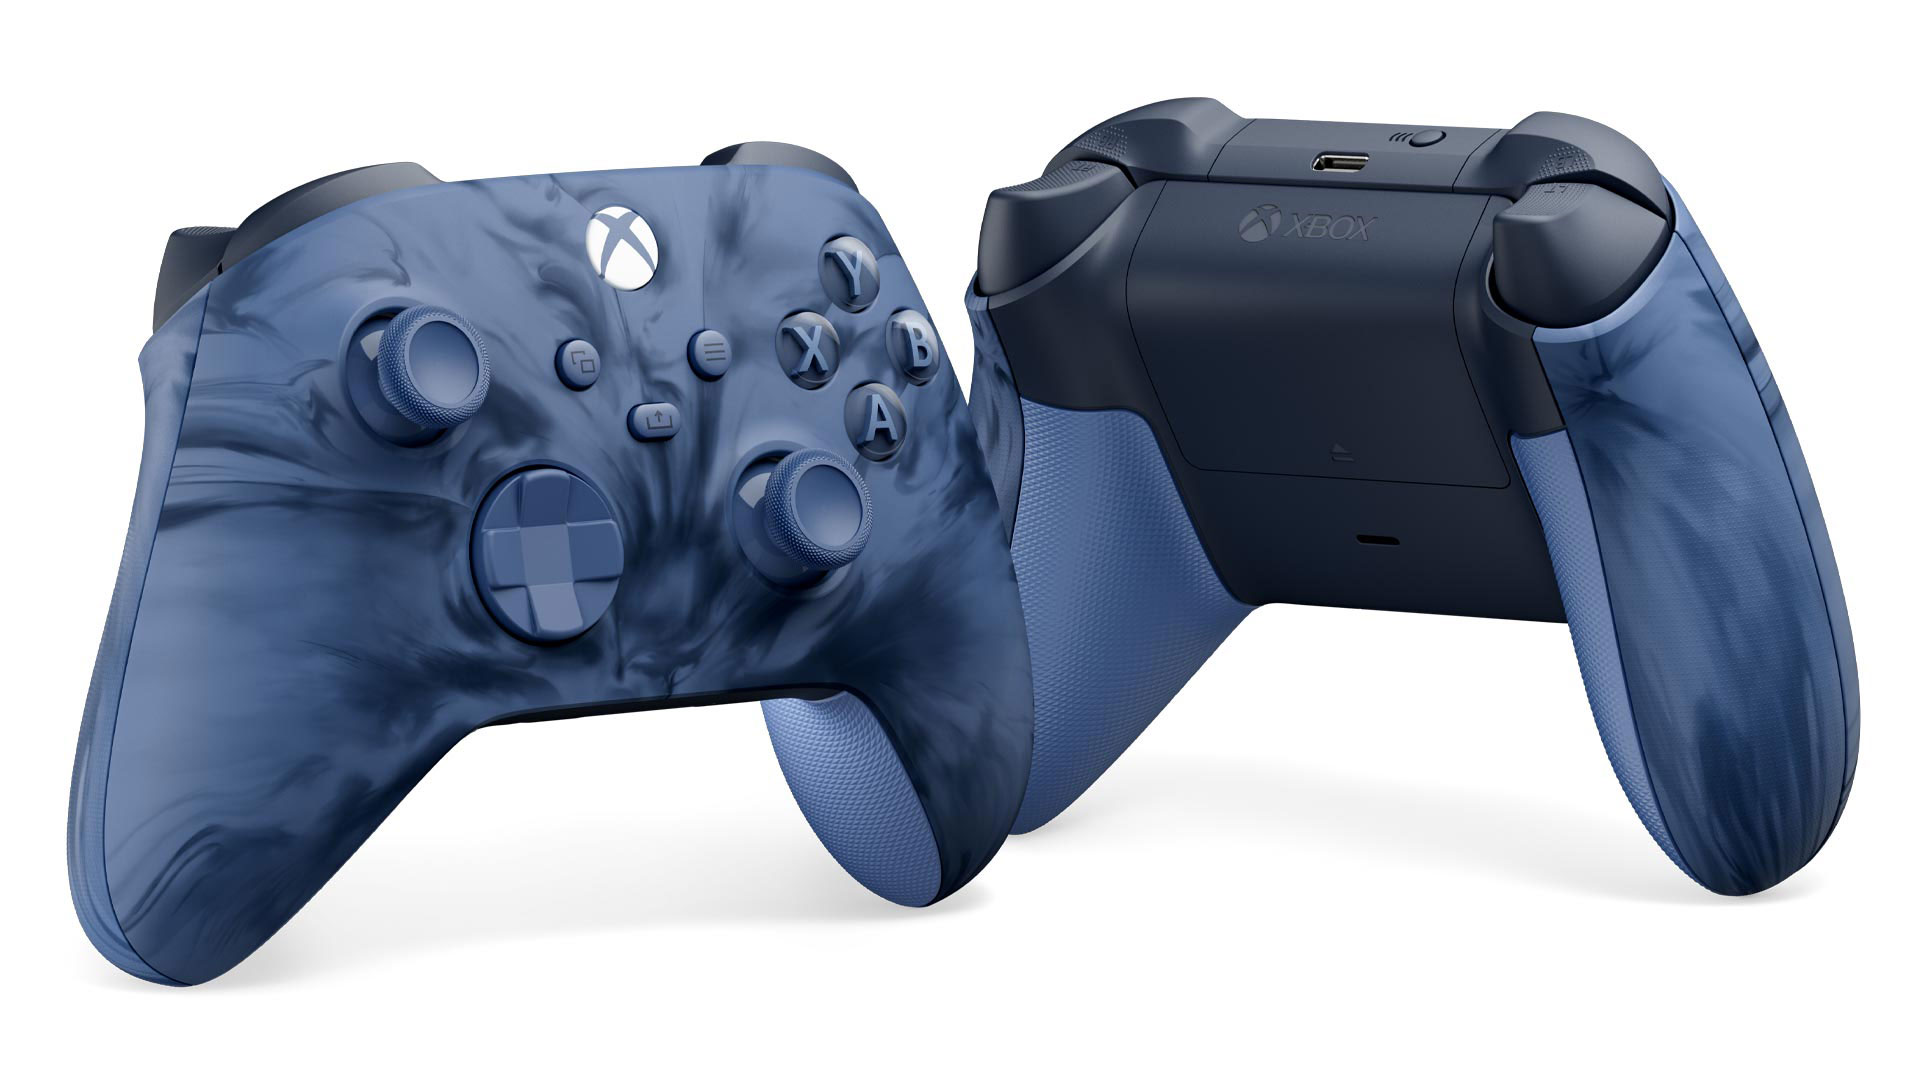 This is arguably the best looking Xbox Wireless Controller yet